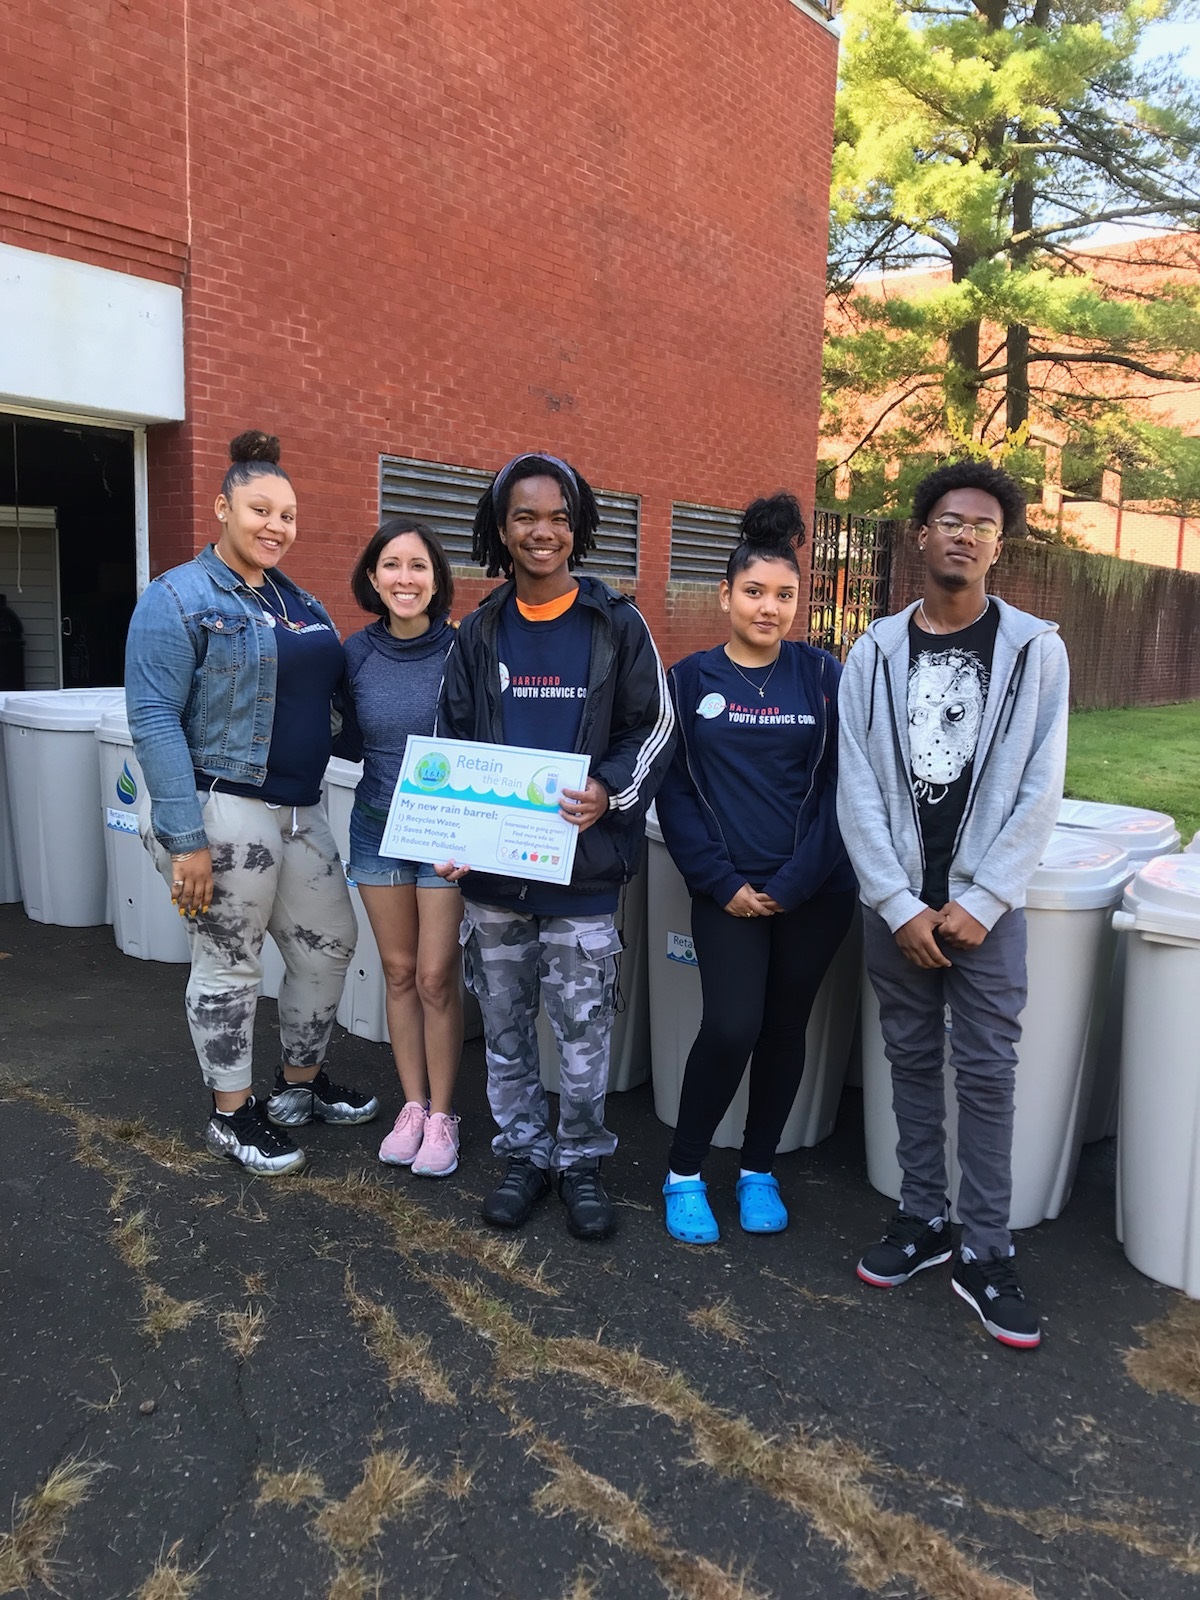 Youth Service Corps Members help give out rain barrels